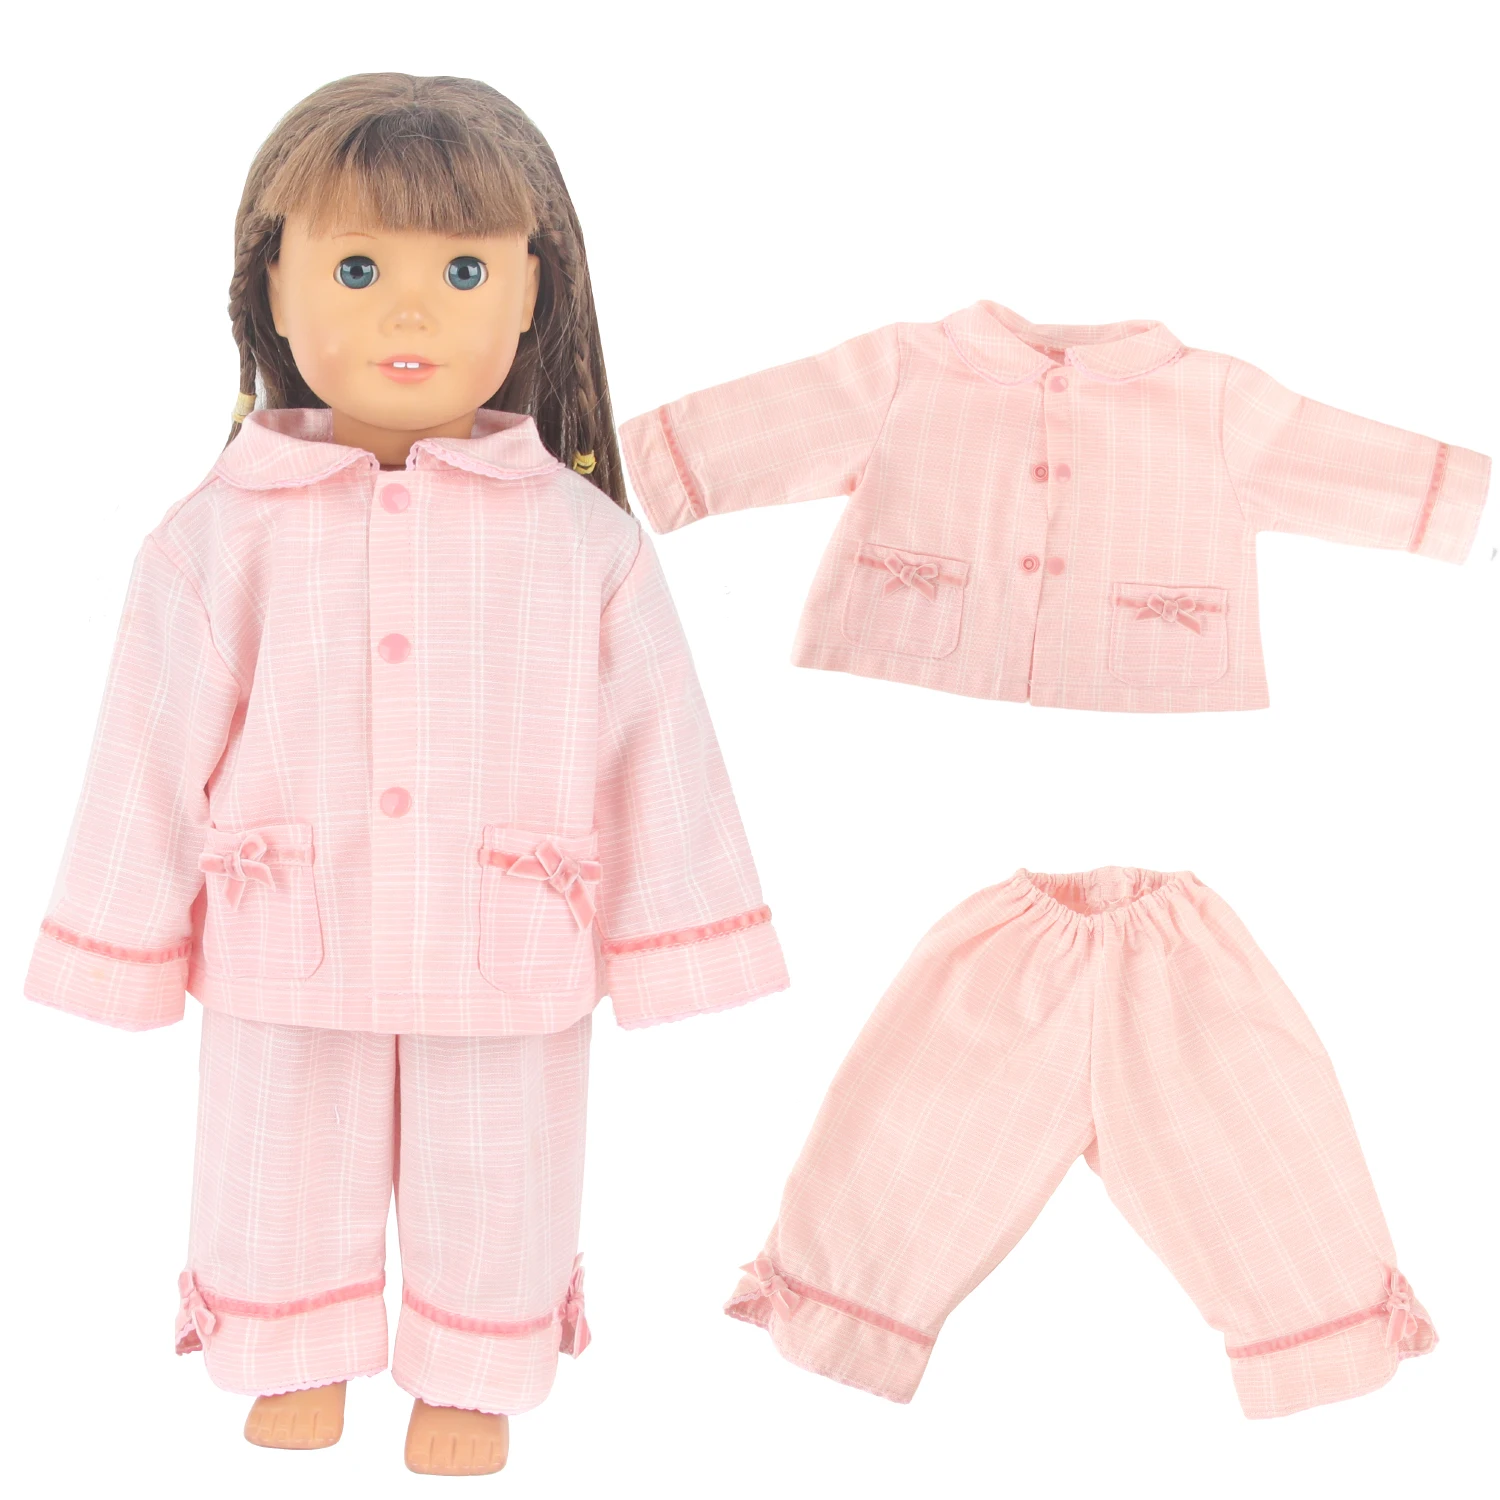 New Pink Bow Knot Doll Clothes Set For 18 Inches American&43cm Baby New Born Dolls,Mini Casual Wear For OG Girl Dolls Toy mini projector led projectors movie projectors 100 inches video beamer uk